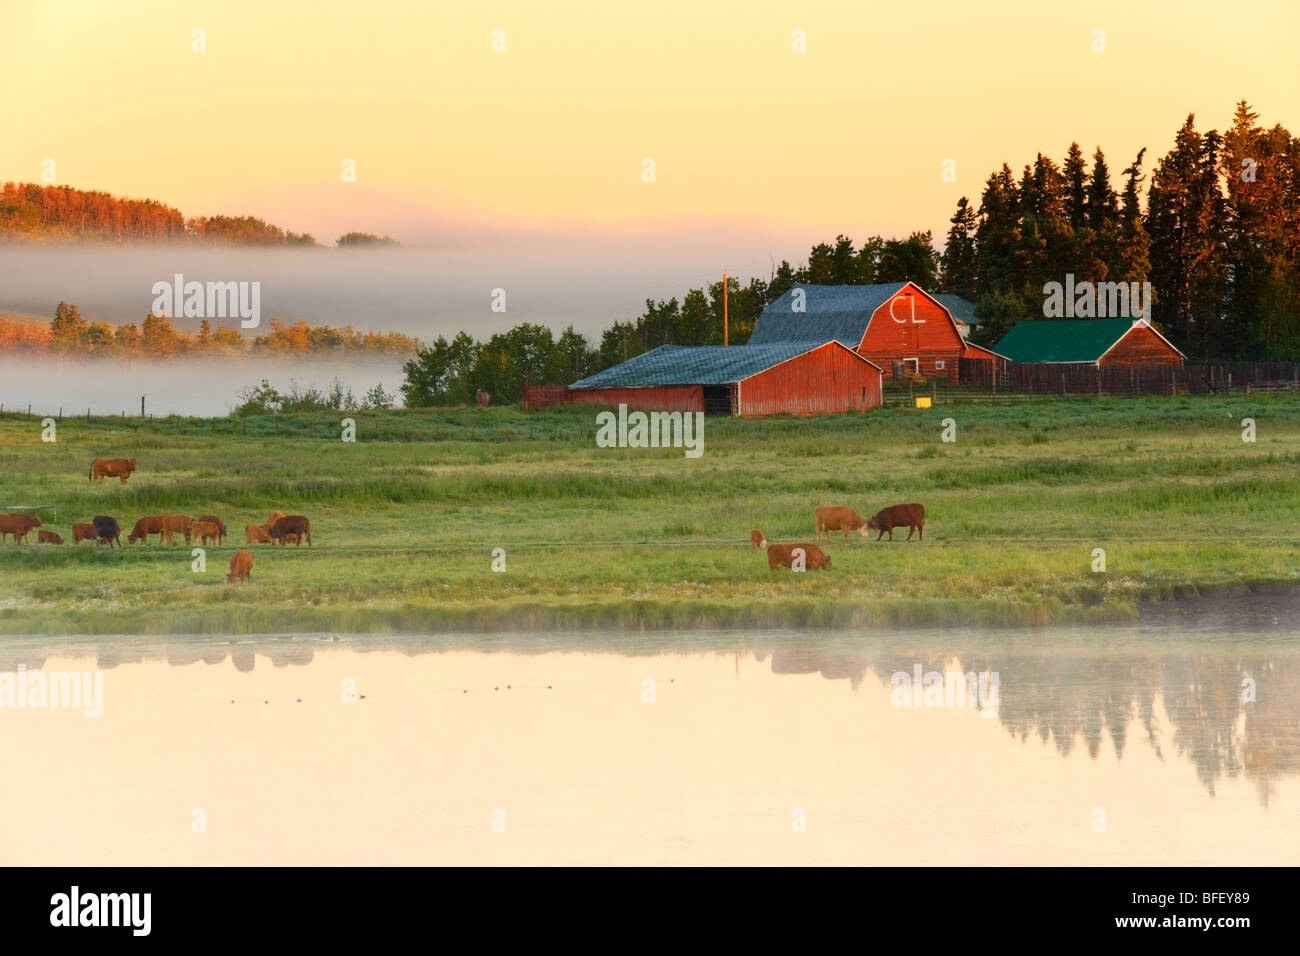 Fog lifting over Ranch in early morning light, Cochrane, Alberta, Canada, Pond, Cattle, Agriculture, Barn Stock Photo